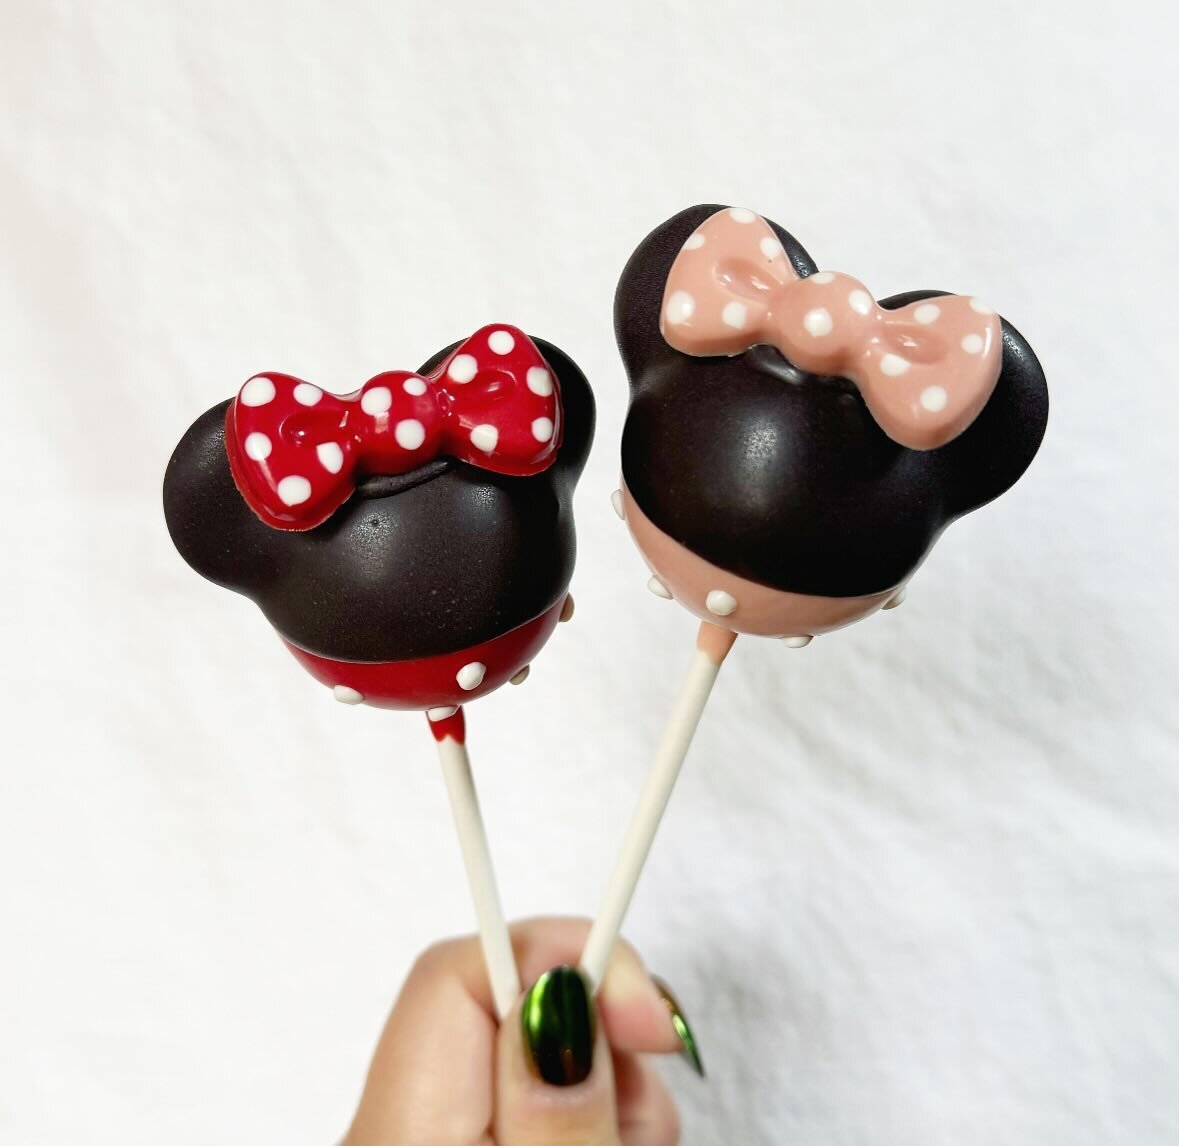 Minnie Mouse ❤️🐭✨
&bull;
&bull;
&bull;
#cakepops #baking #dessert #sweets #foodie #foodporn #foodphotography #instadessert #foodofinstagram #bakersofinstagram #dessertgram #cakepopsofinstagram #cakepopstagram #cakepopart #foodstyling #baker #dailyfo